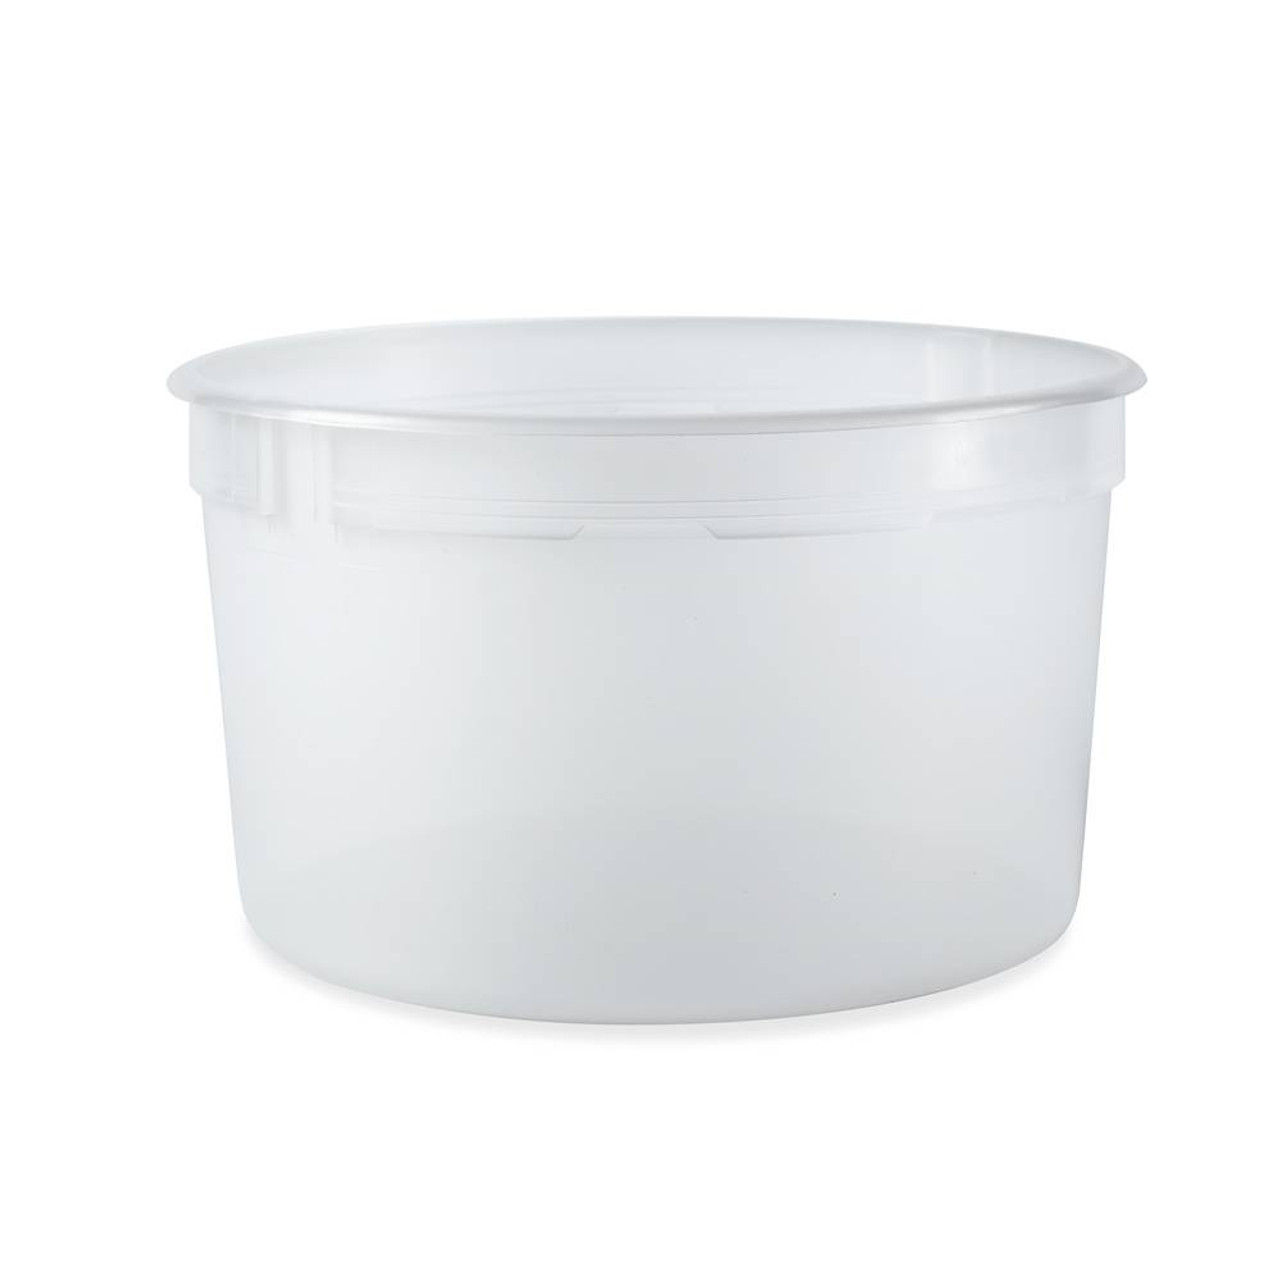 8 Clear Glass Round Container With Lid by Park Lane